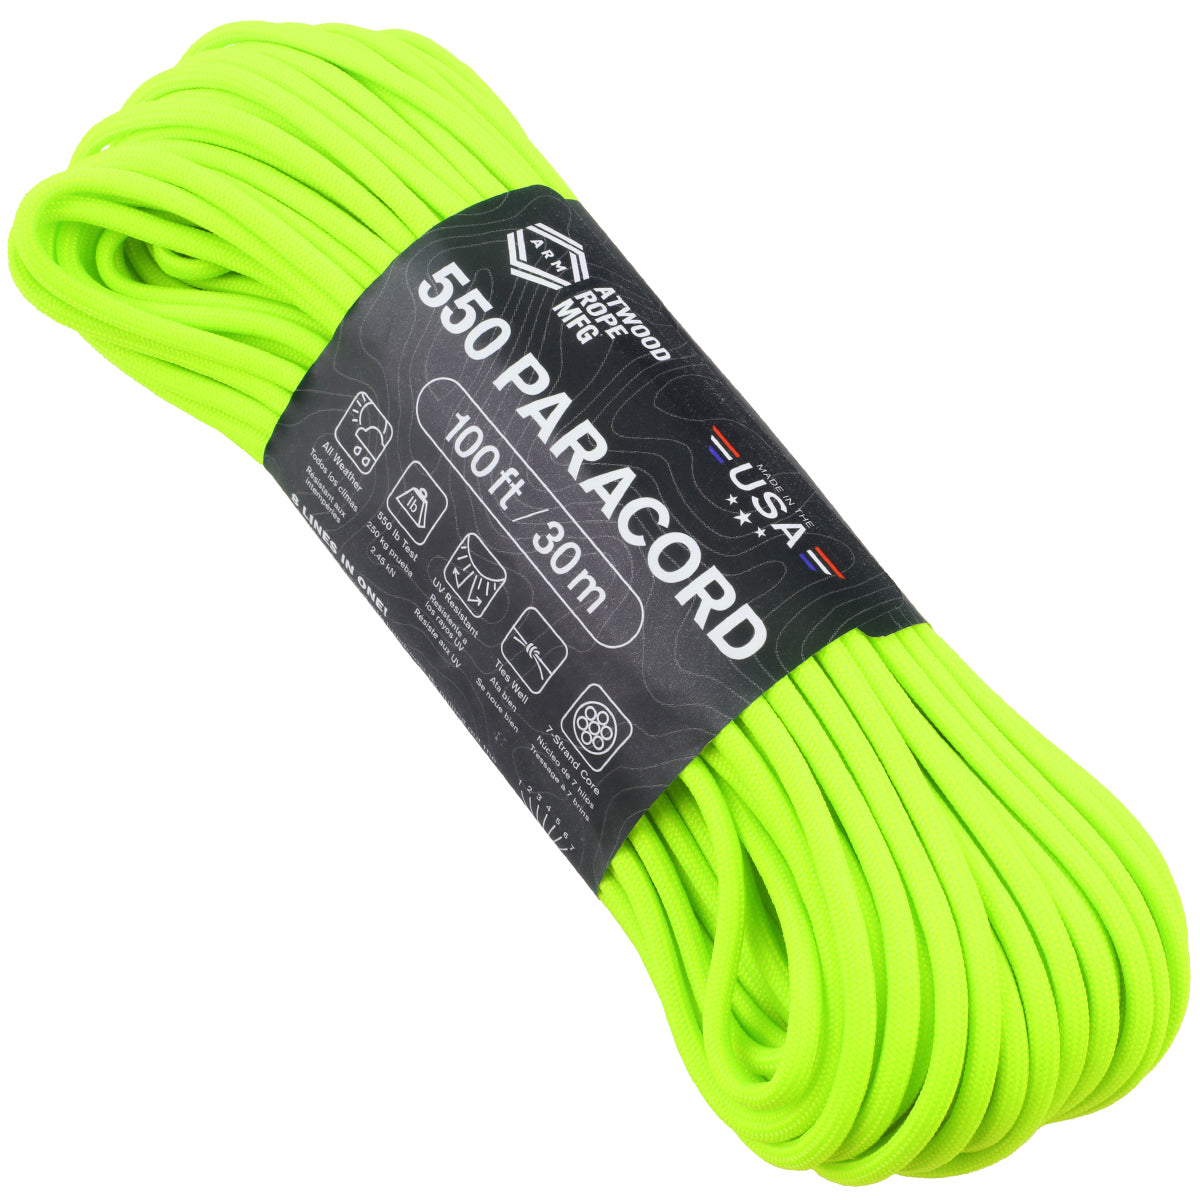 Atwood Rope Mfg ZS09 Paracord, 5/32 in Dia, Antidote